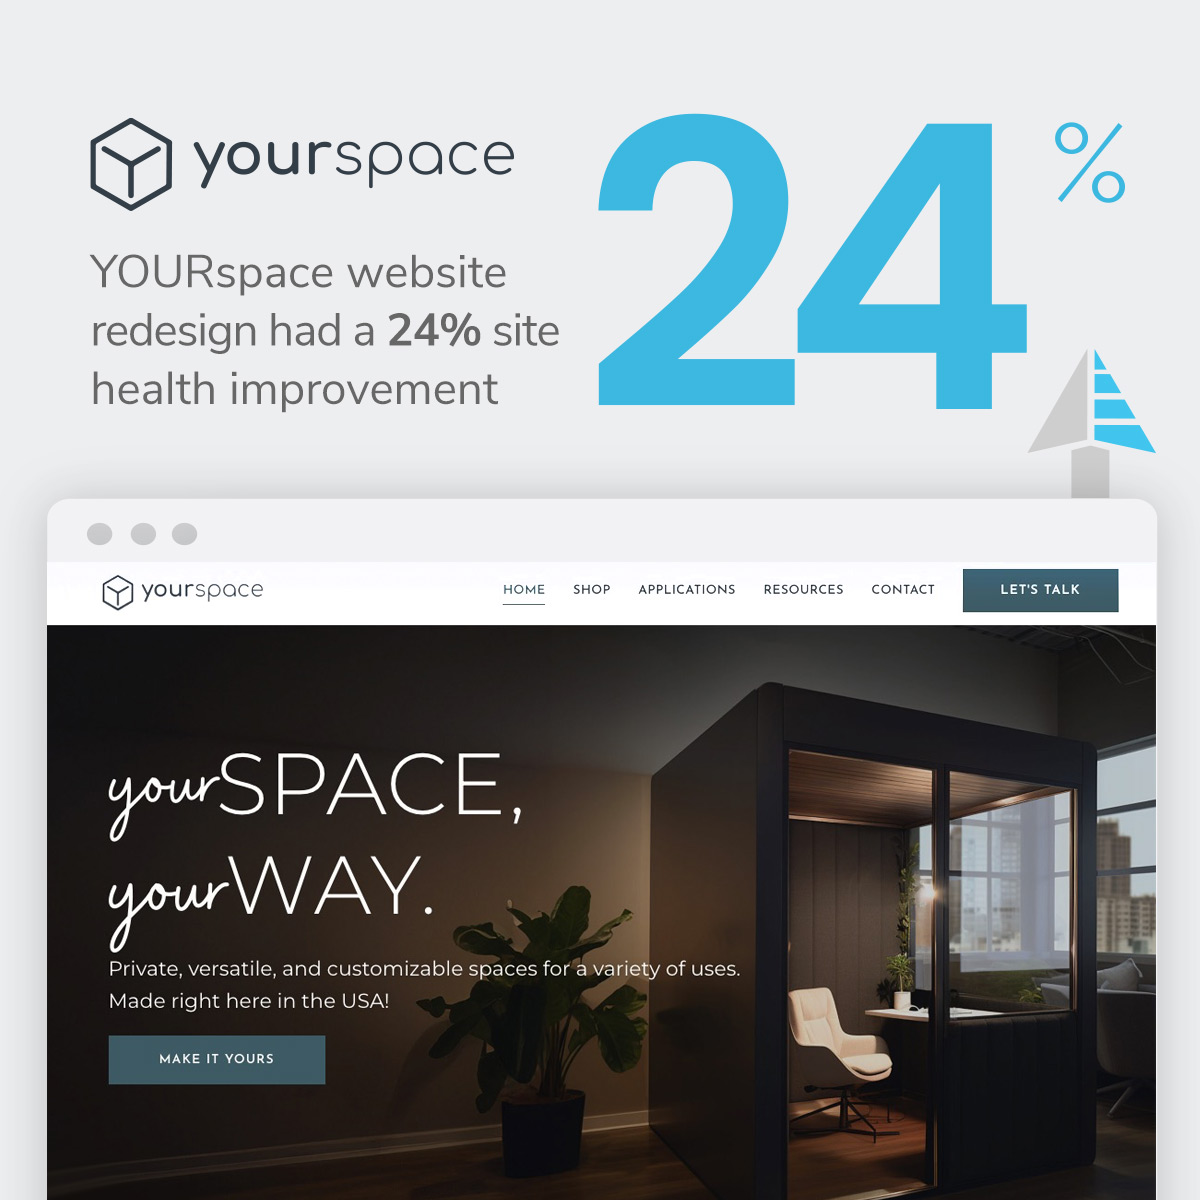 YOURspace Redesign